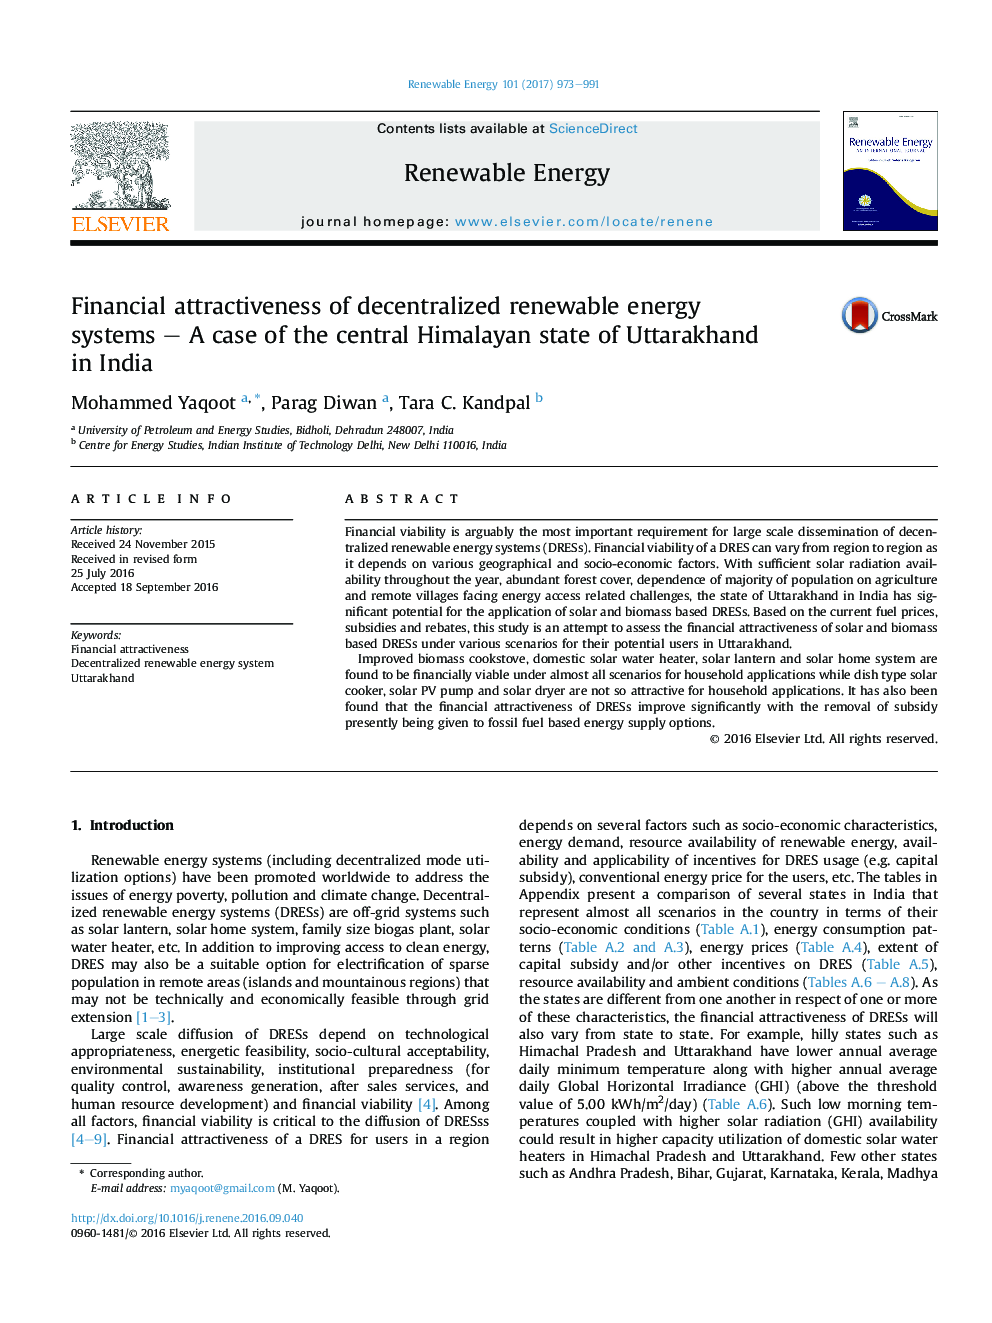 Financial attractiveness of decentralized renewable energy systems -Â A case of the central Himalayan state of Uttarakhand in India